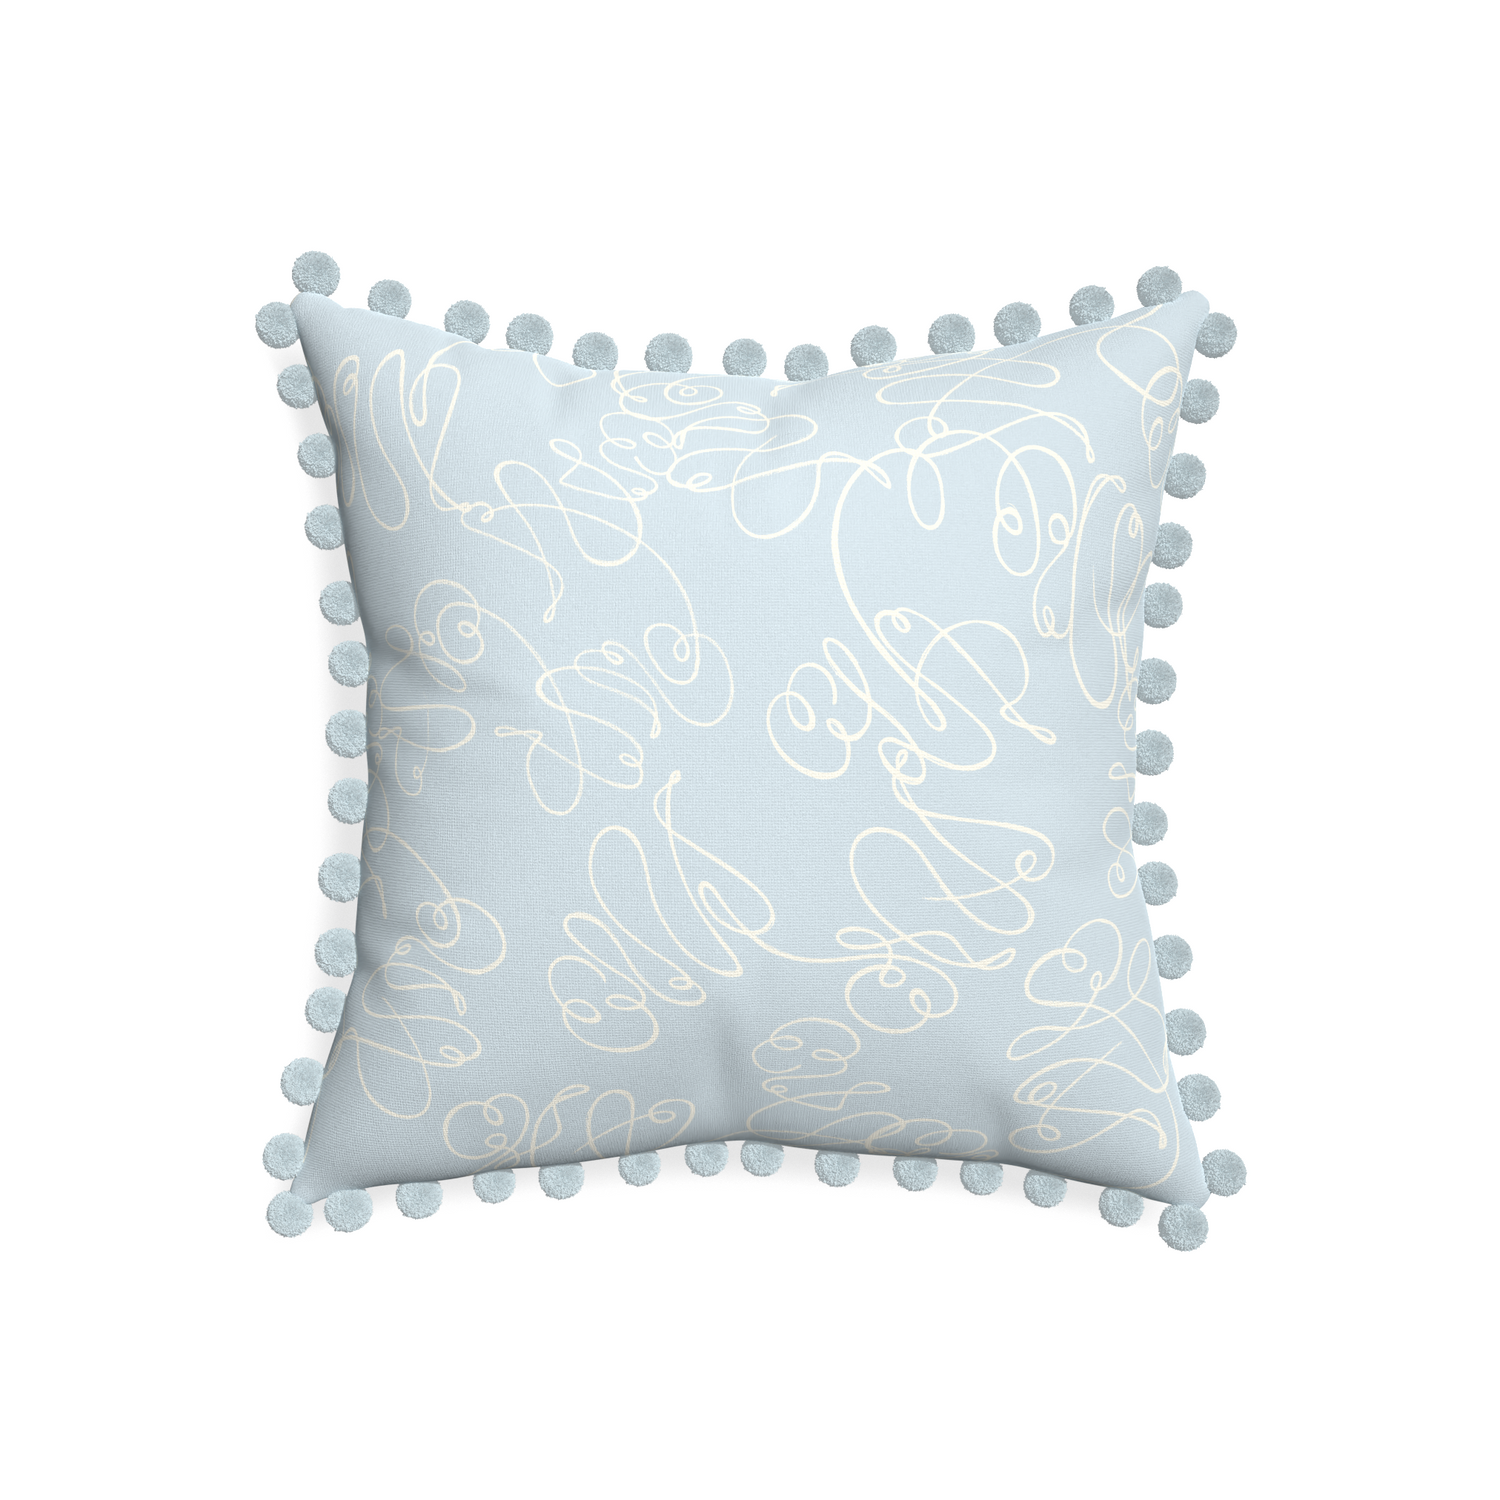 20-square mirabella custom powder blue abstractpillow with powder pom pom on white background